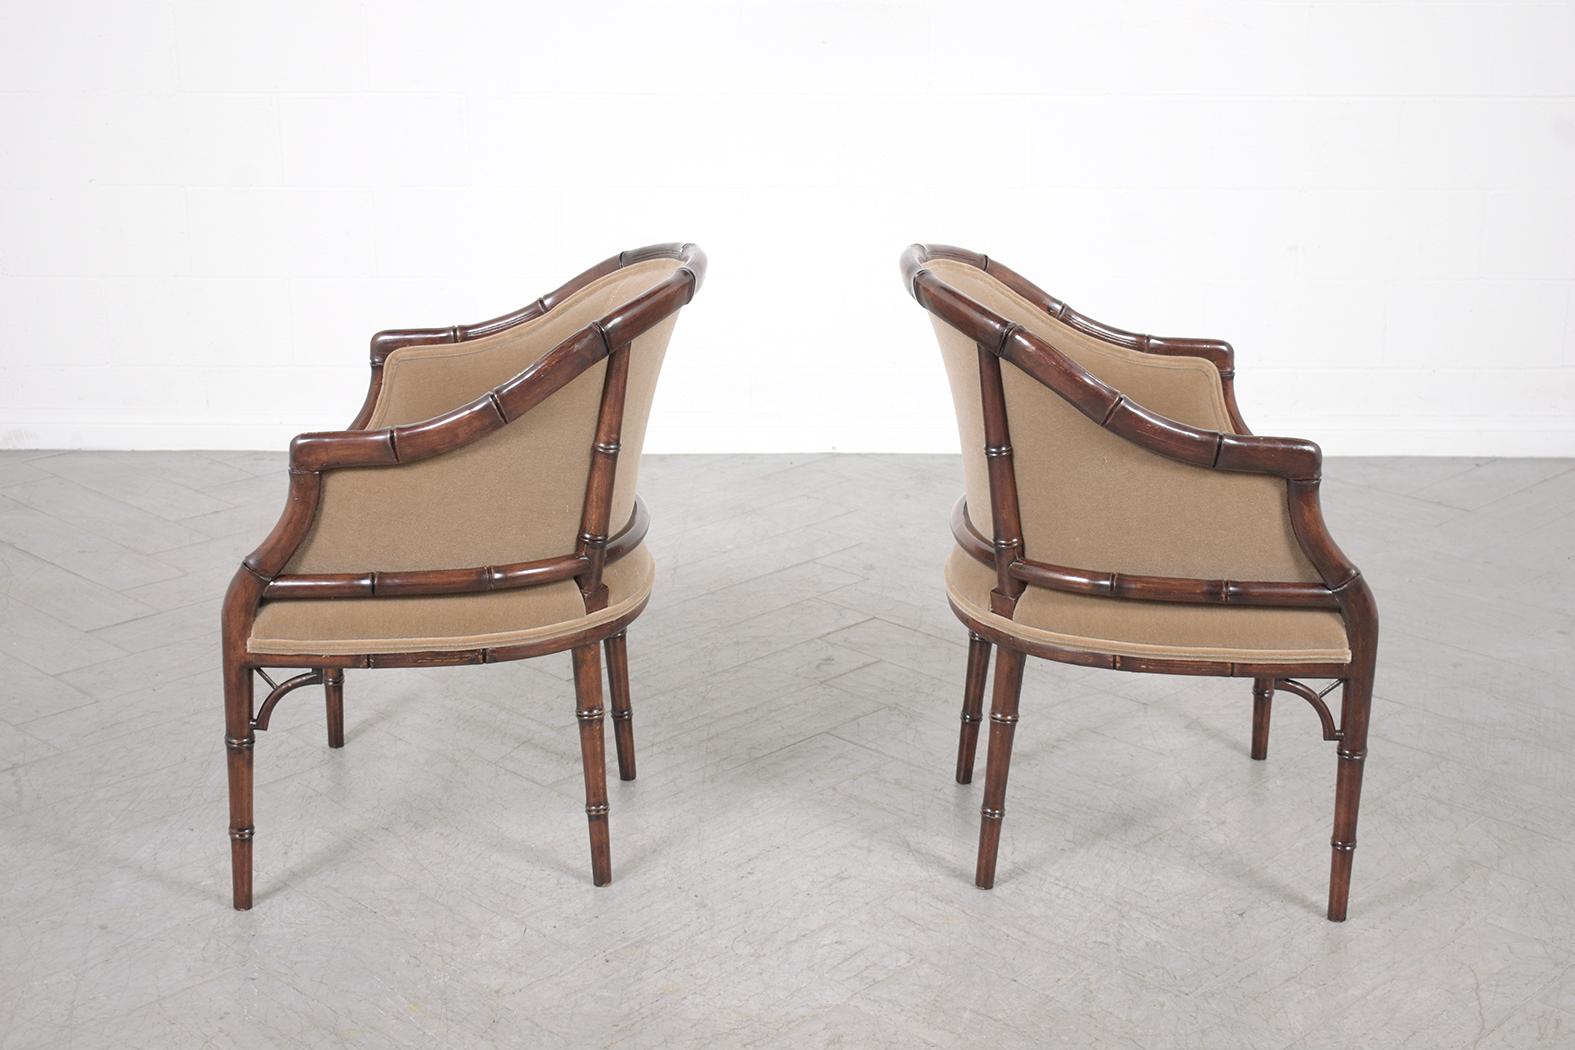 Elegant Vintage Hollywood Regency Armchairs: Bamboo-Carved and Newly Refurbished For Sale 4